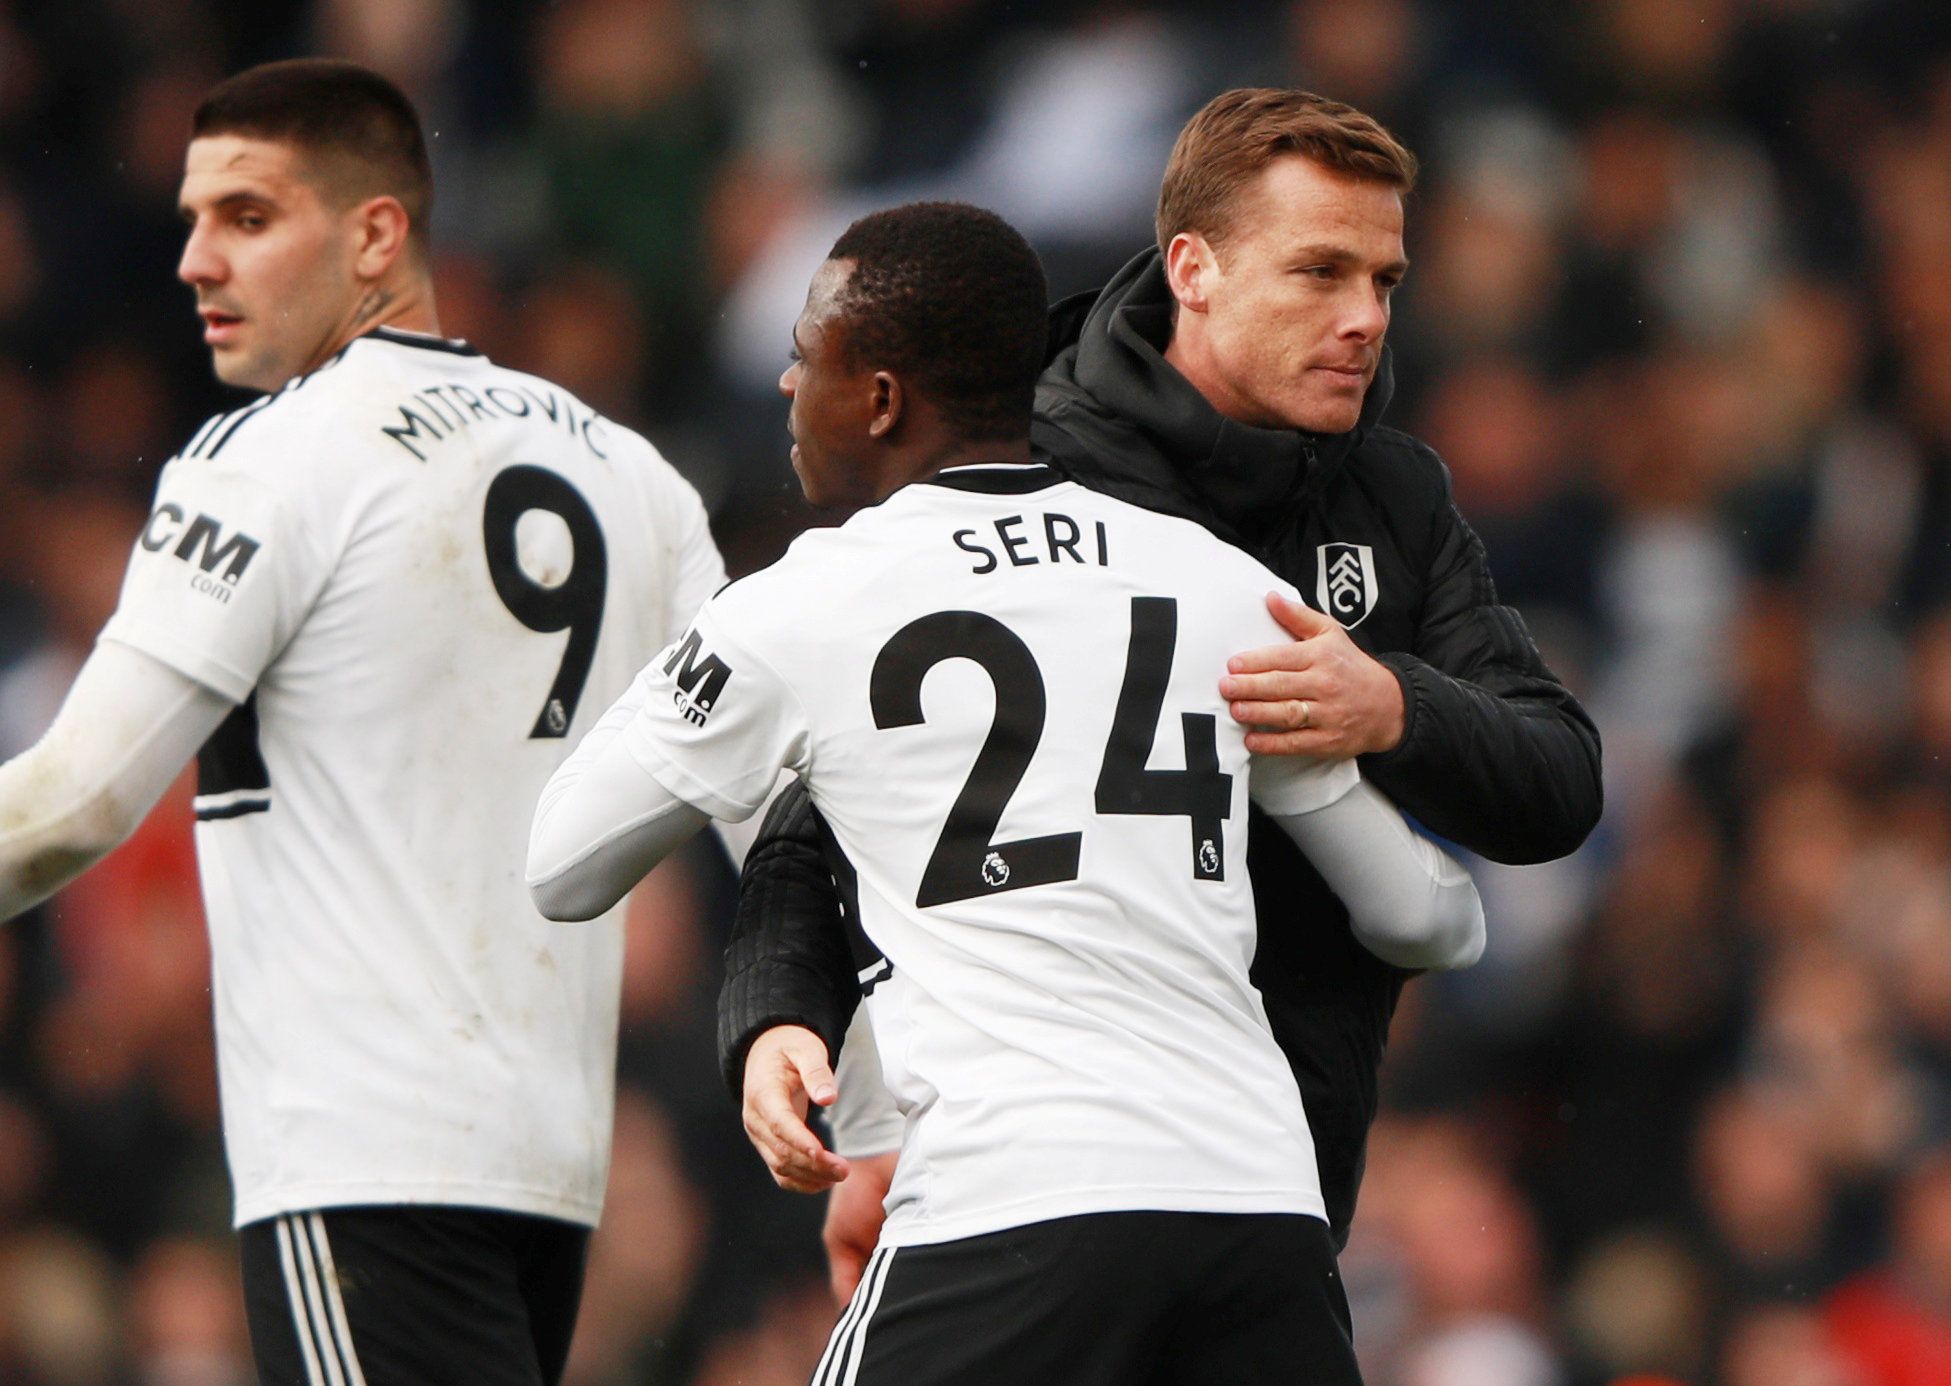 Soccer Football - Premier League - Fulham v Everton - Craven Cottage, London, Britain - April 13, 2019  Fulham caretaker manager Scott Parker celebrates after the match with Jean Michael Seri as Aleksandar Mitrovic looks on  REUTERS/Ian Walton  EDITORIAL USE ONLY. No use with unauthorized audio, video, data, fixture lists, club/league logos or "live" services. Online in-match use limited to 75 images, no video emulation. No use in betting, games or single club/league/player publications.  Please